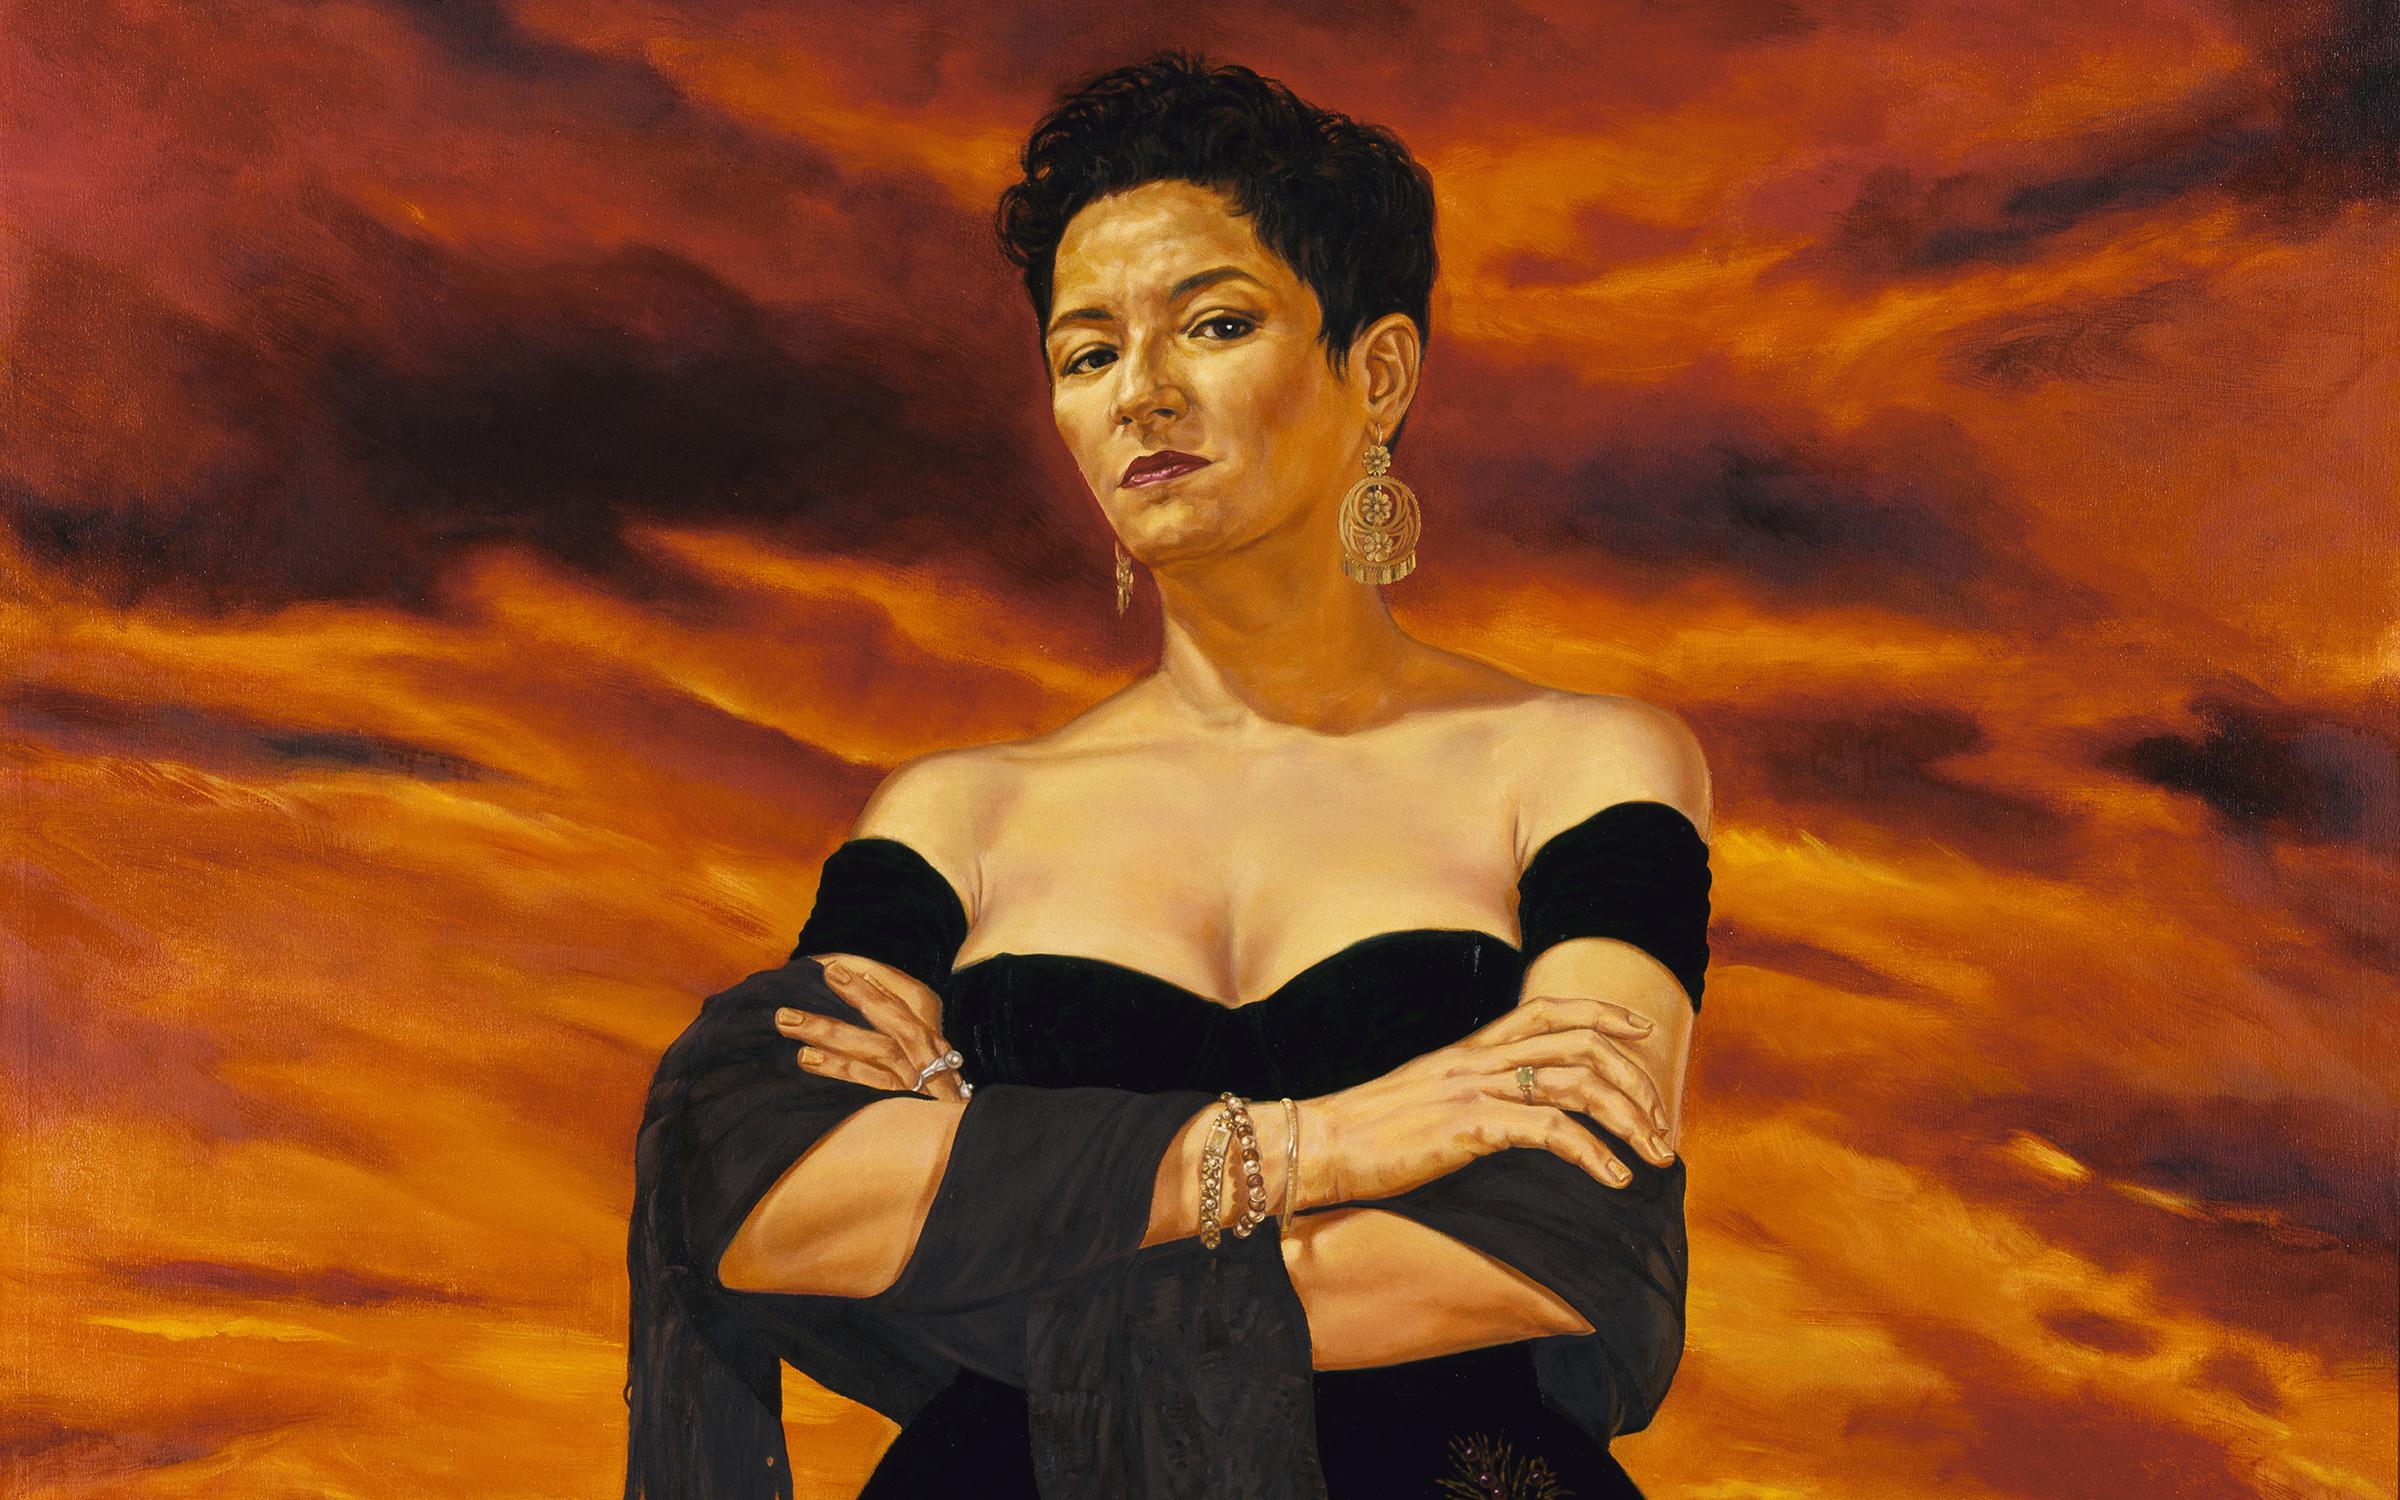 an oil painting of a woman with short hair wearing a fancy off the shoulder balck dress her arms are folded across her chest and is looking slightly down towards the viewer with a stern gaze there is a red cloudy sky behind her